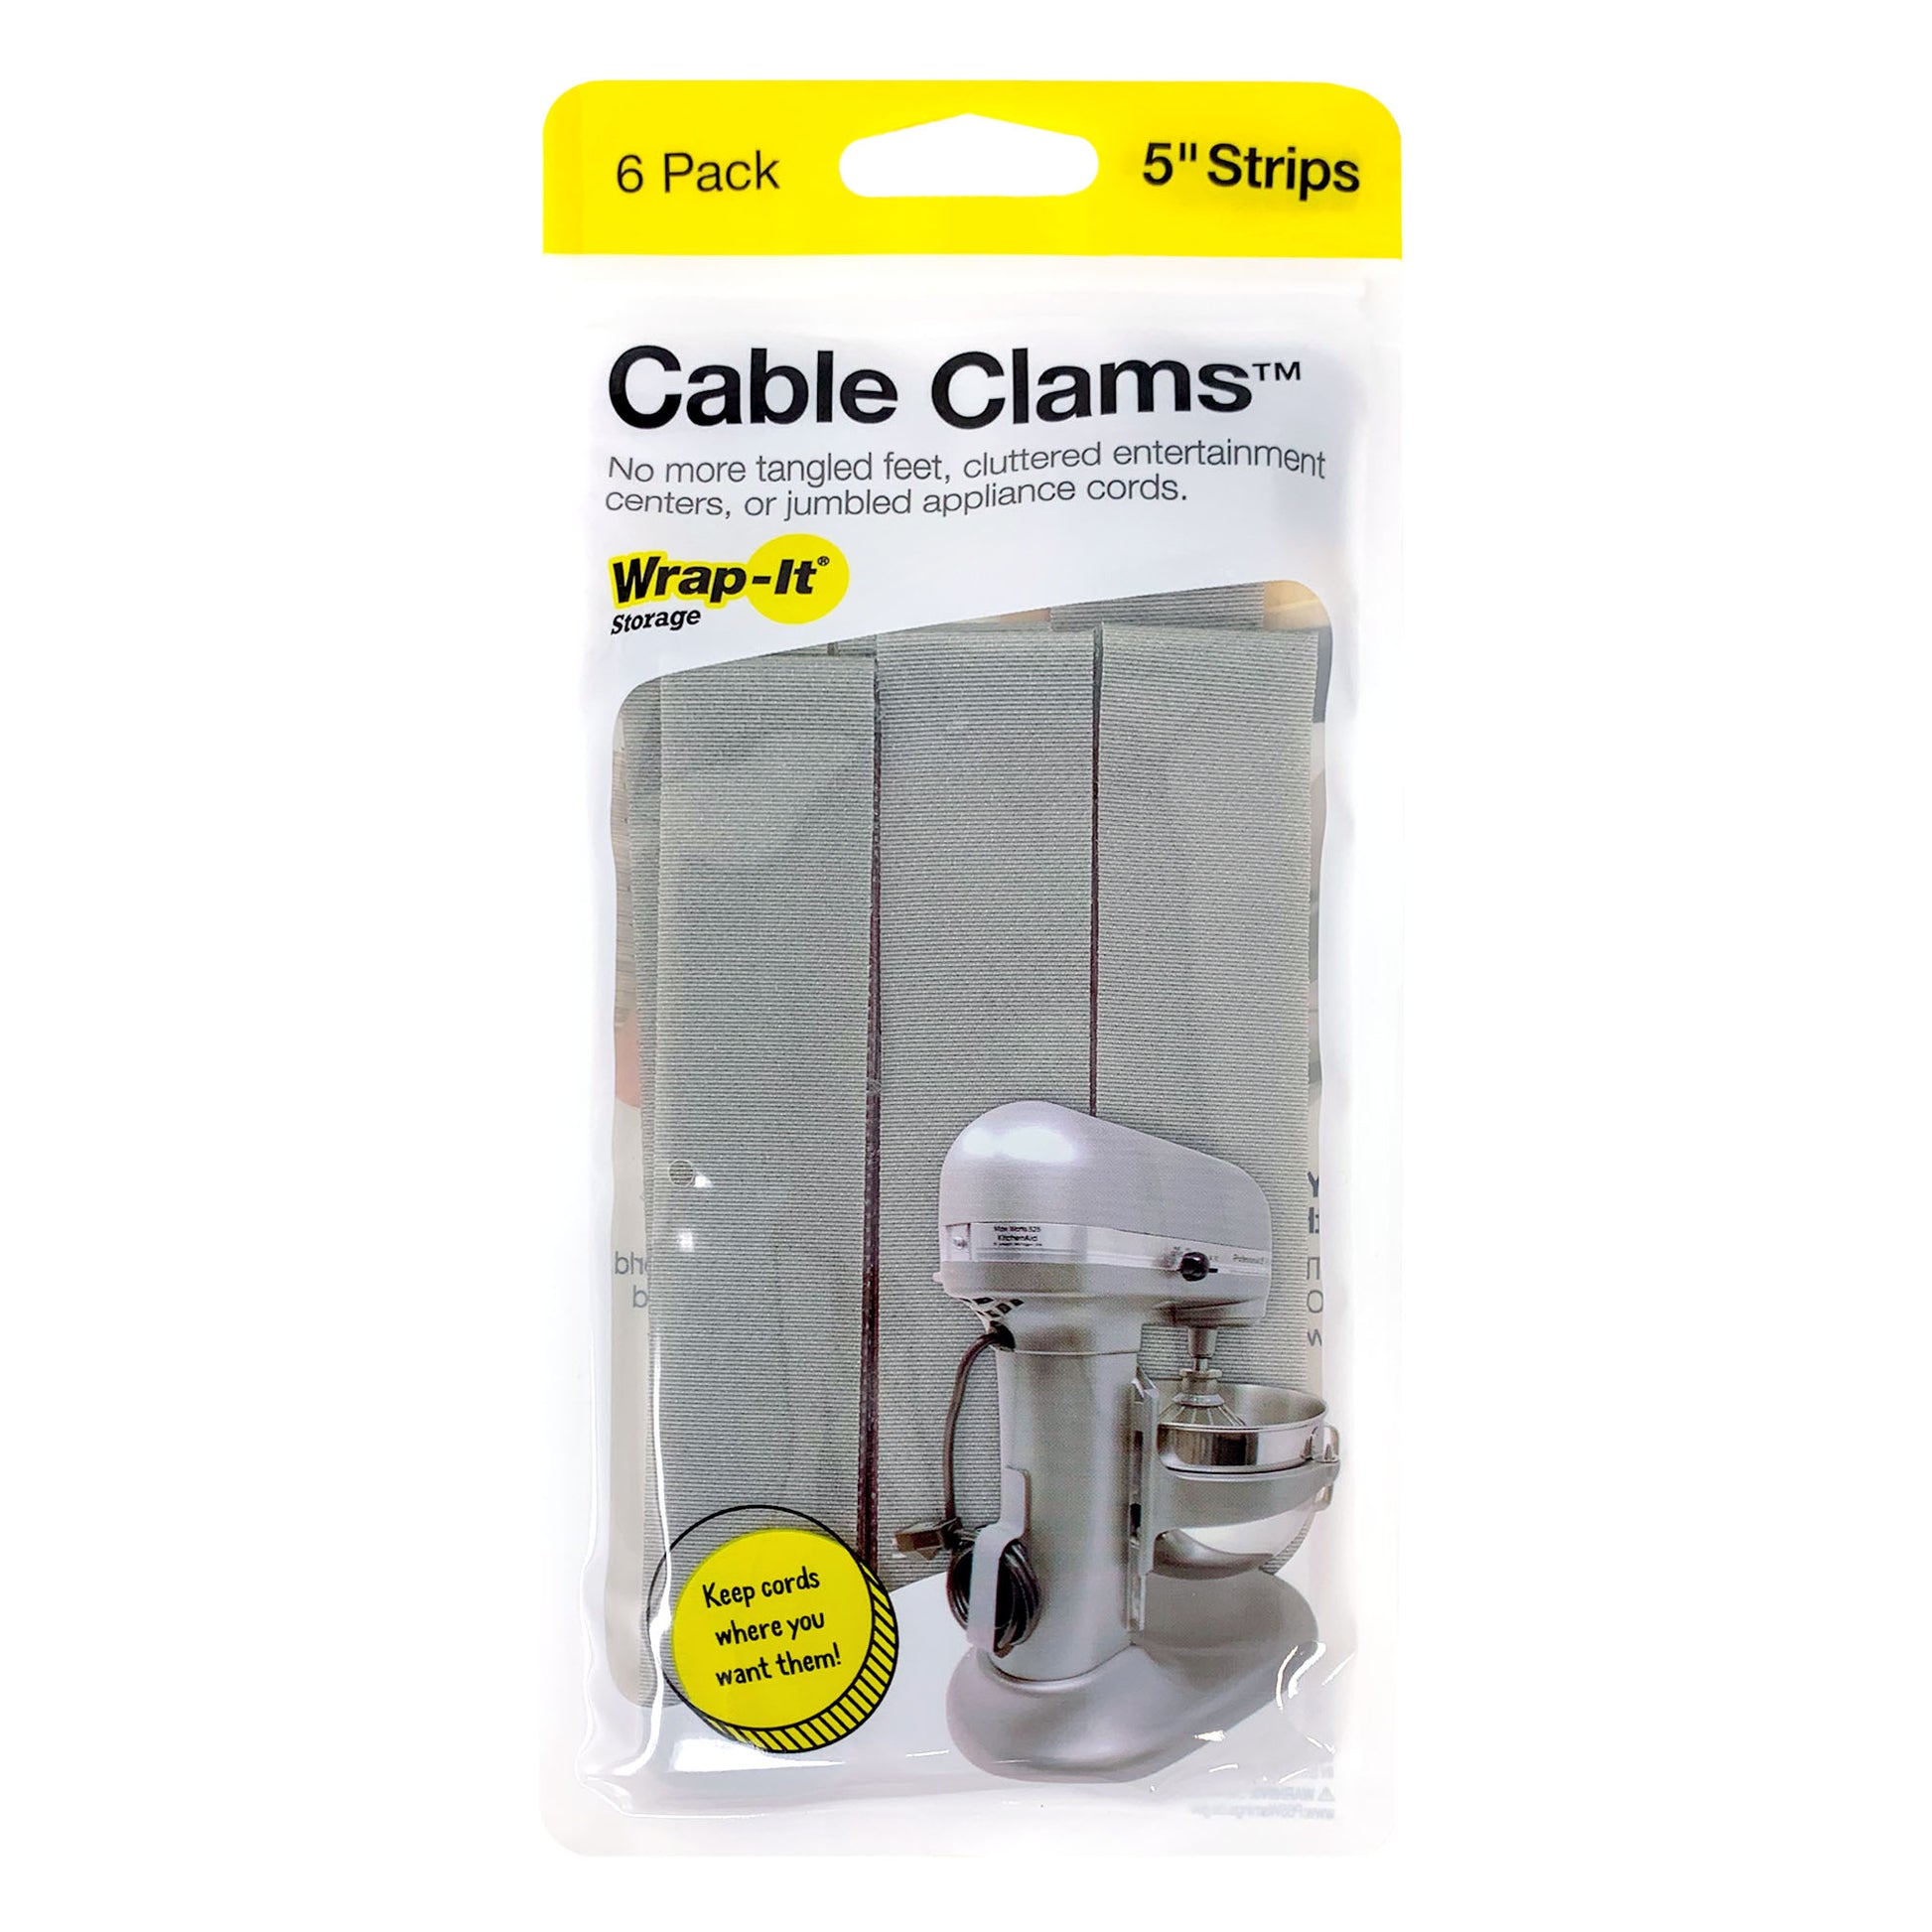 Cable Clams 5-in. Strip (6-Pack) - Wrap-It Storage